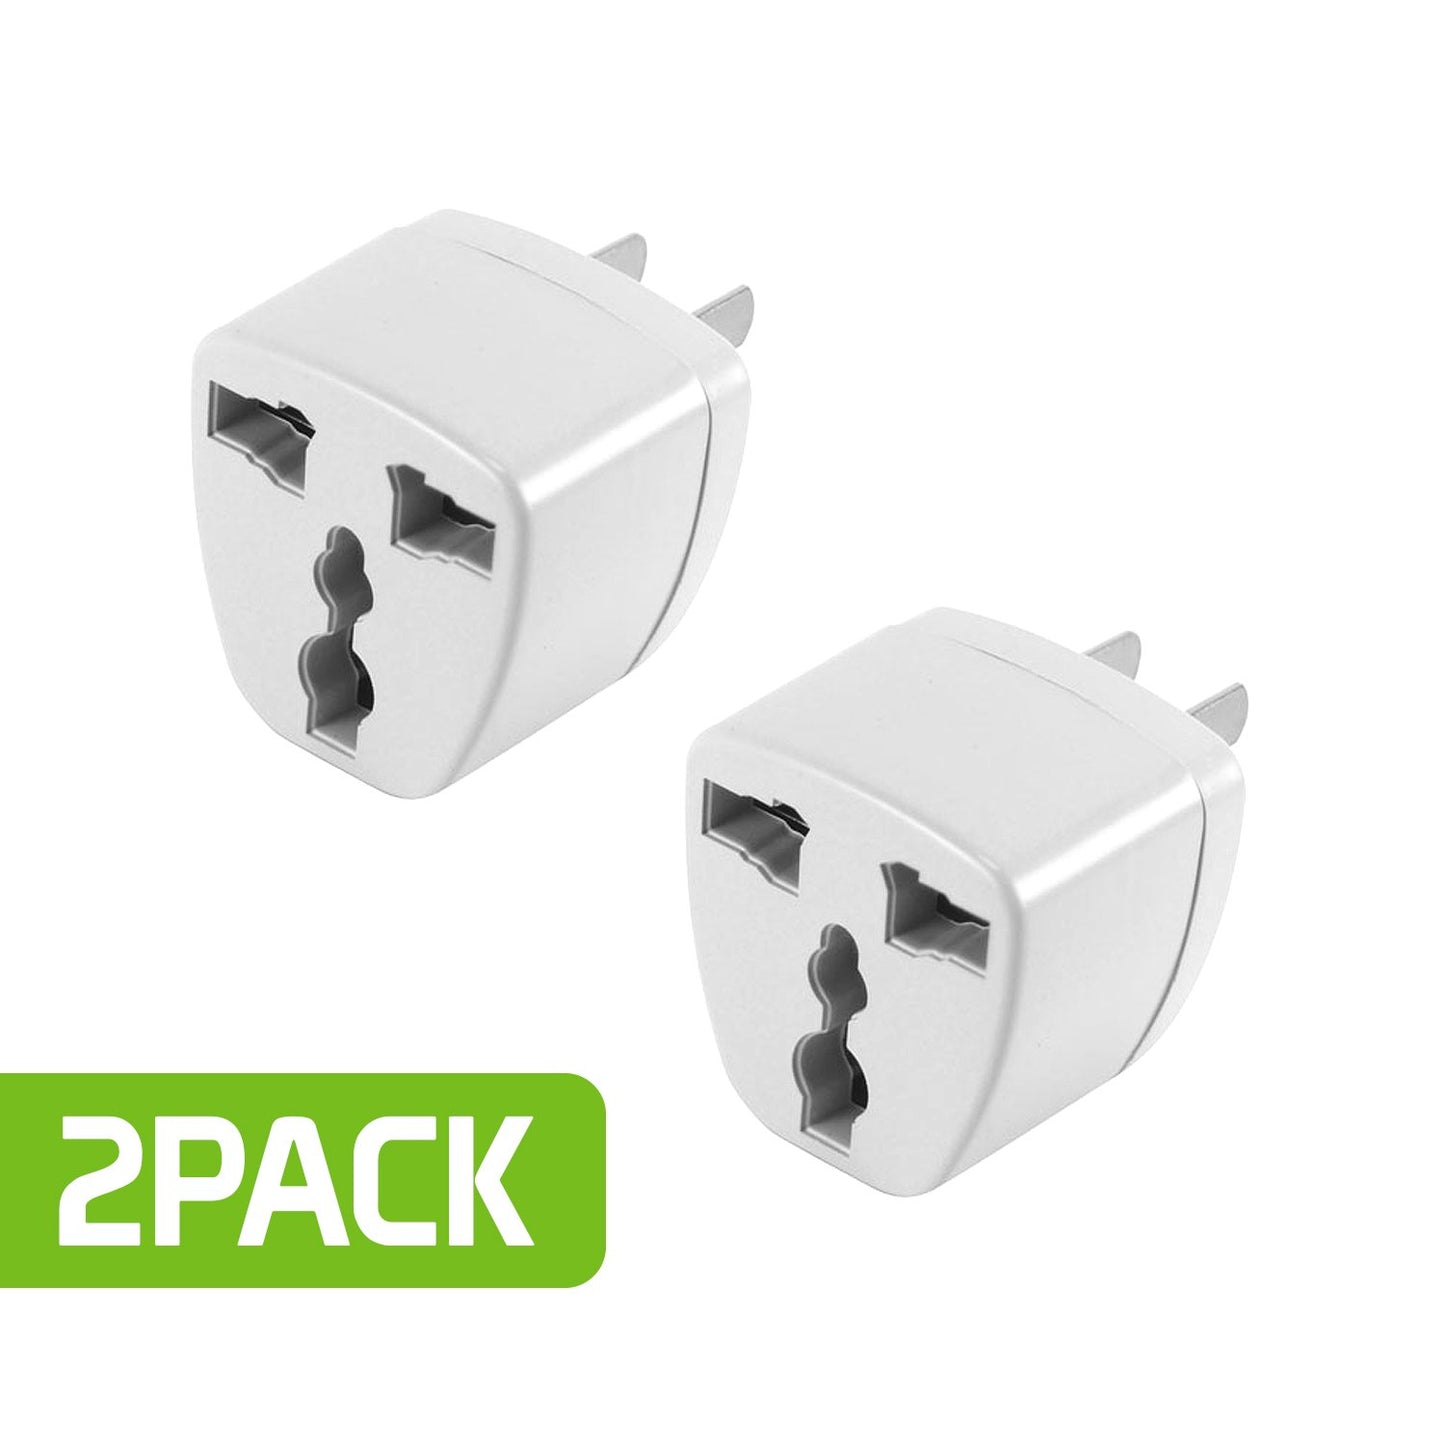 Cellet Universal Travel AC Wall Power Adapter to Convert China, UK, AU, EU & other Plugs to US Plug Socket (2PACK)